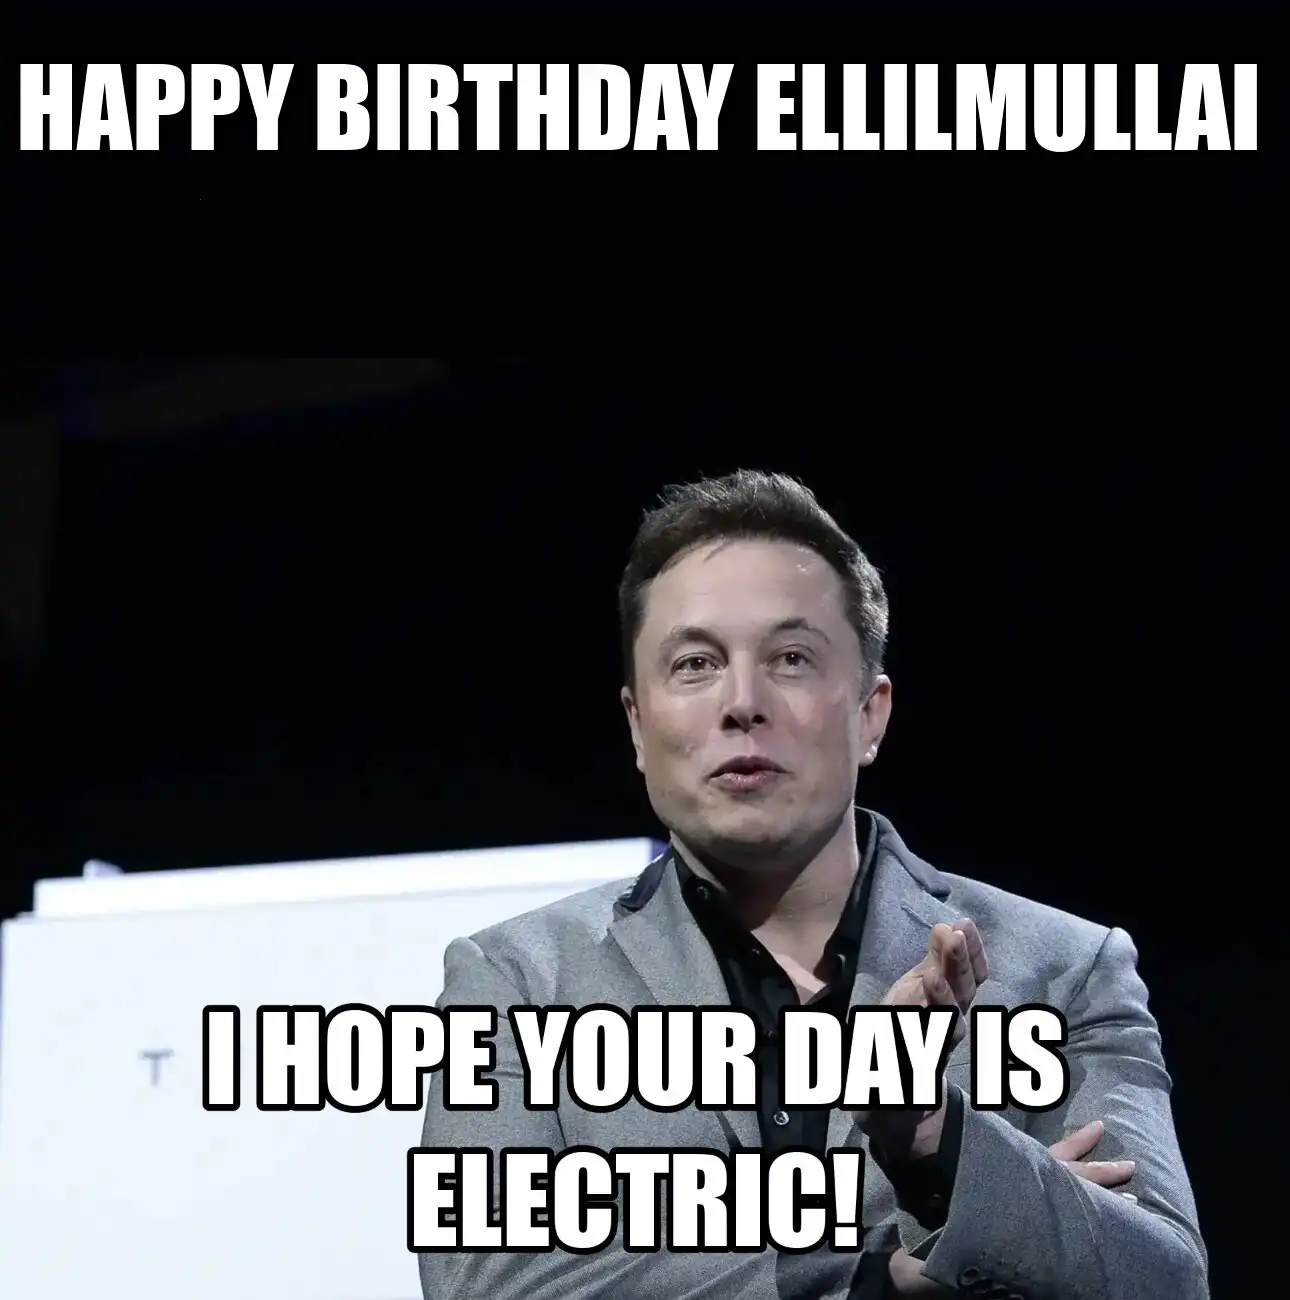 Happy Birthday Ellilmullai I Hope Your Day Is Electric Meme